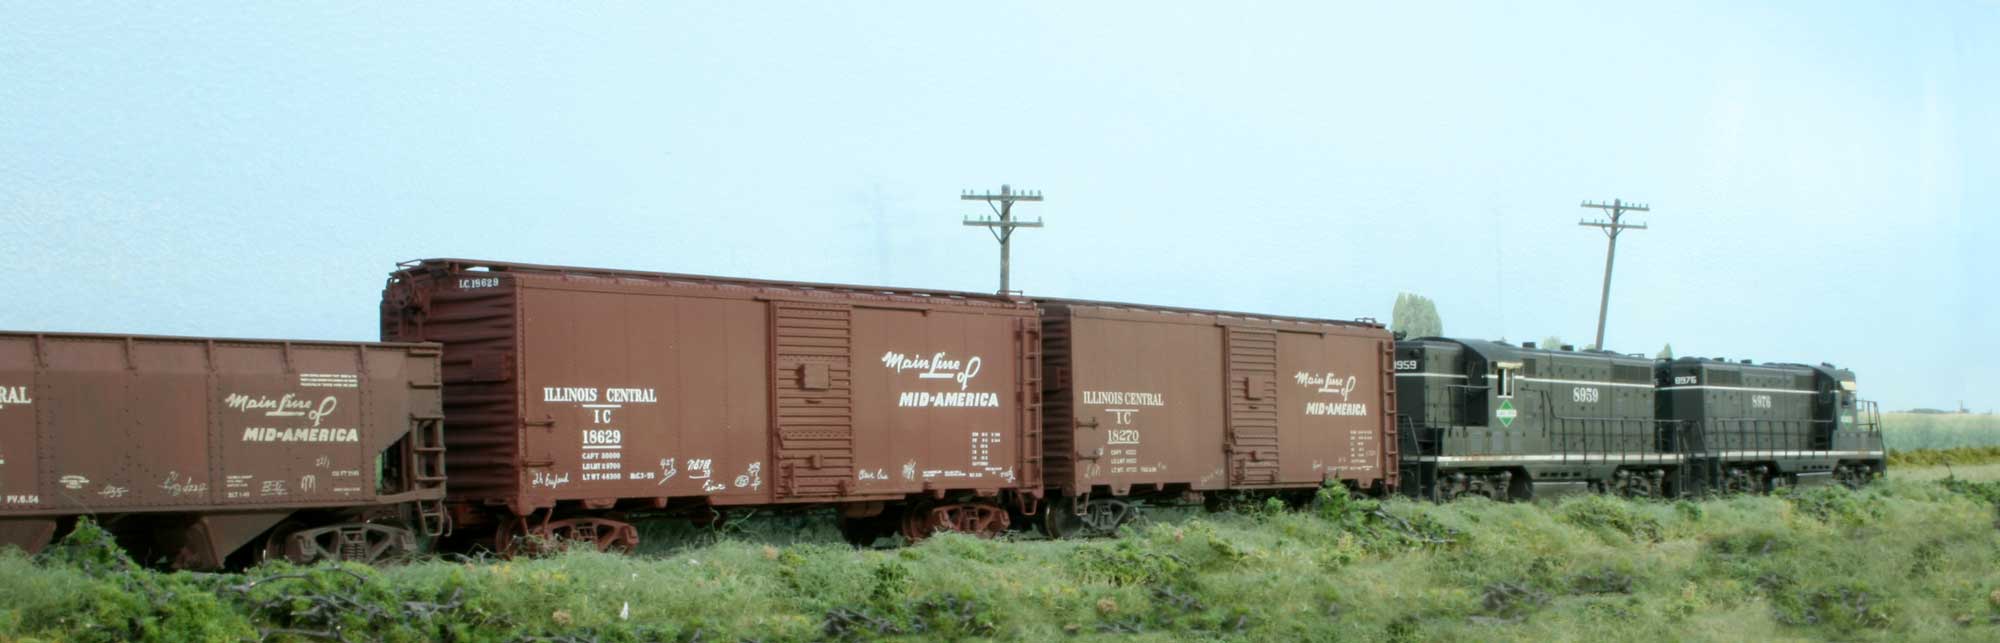 Champ decals HO HB-386 Illinois Central white letters   box car  M38